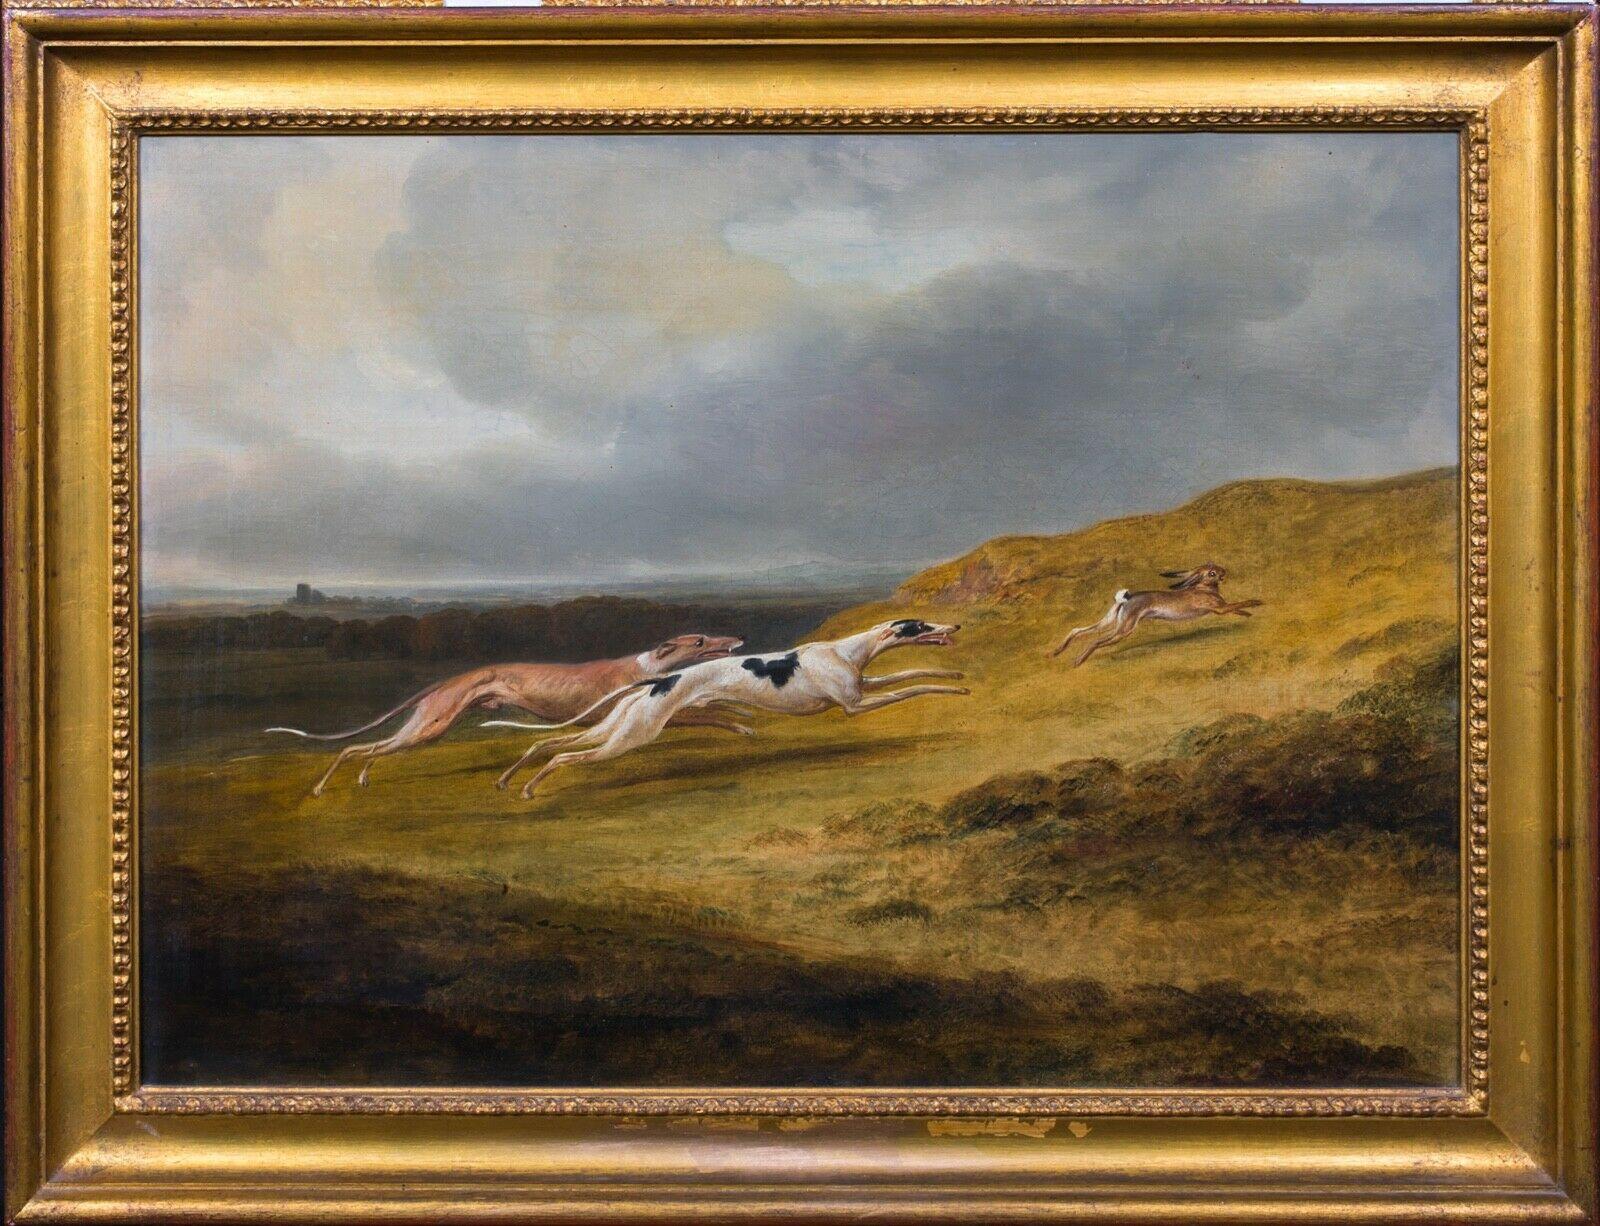 Greyhounds Coursing, 18th Century  - Painting by John Nost Sartorius